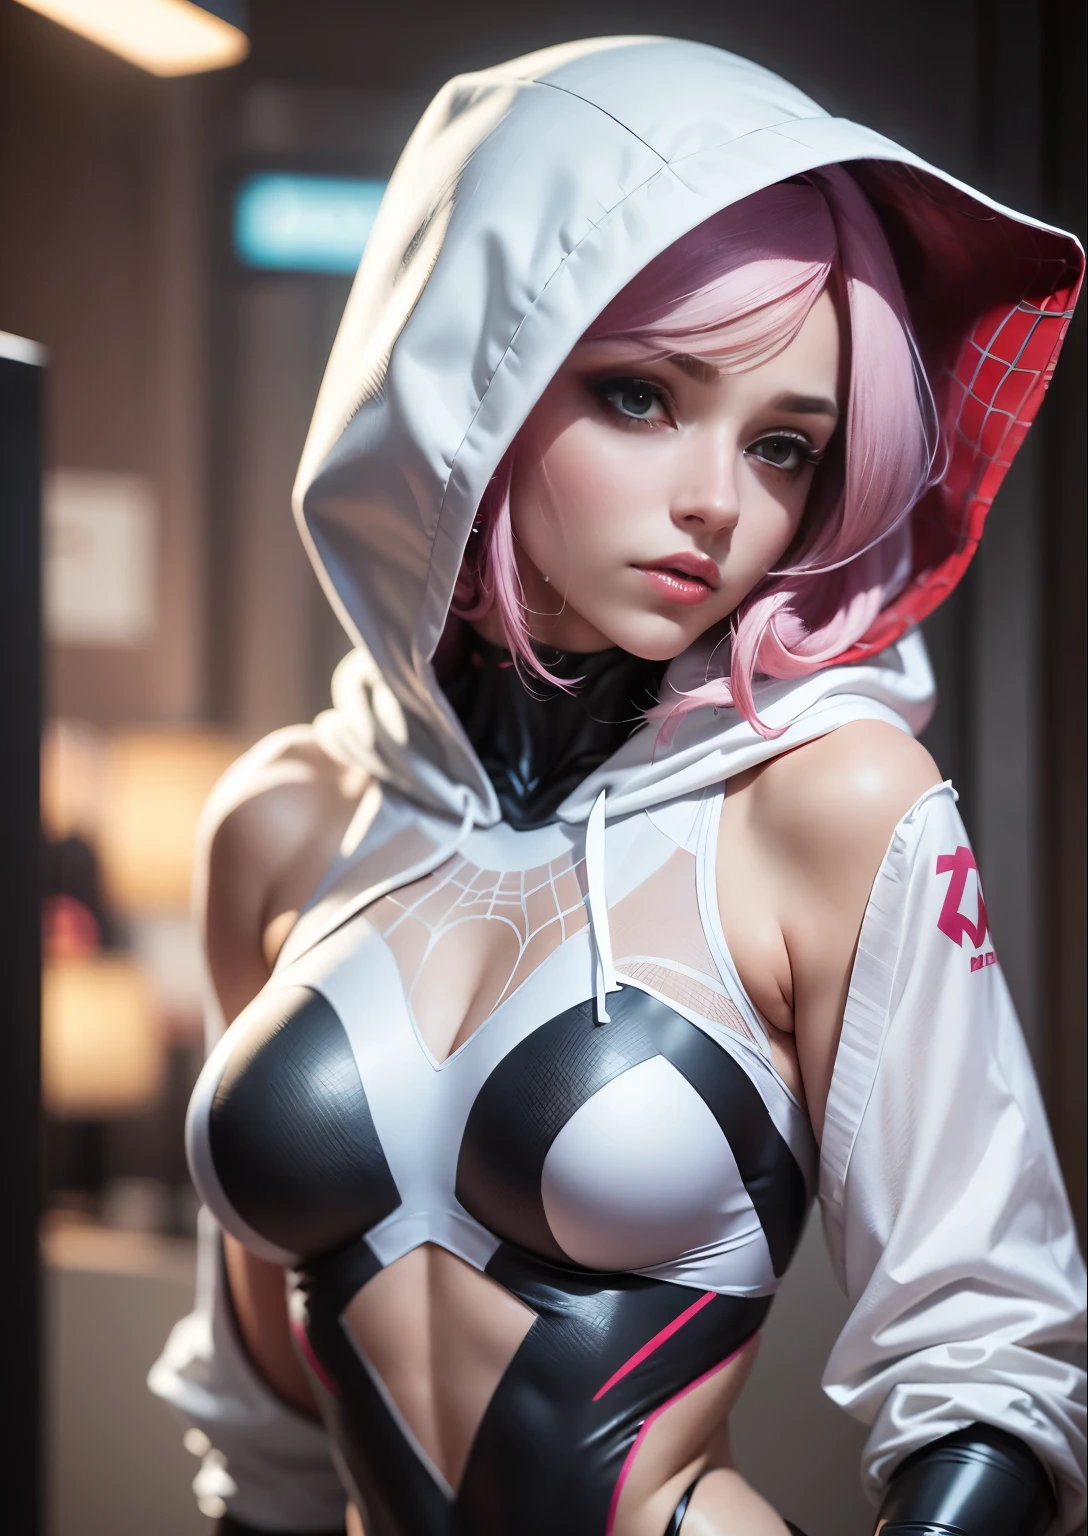 a close up of a woman with pink hair wearing a white hoodie, spider gwen, spider - gwen, spider-gwen, wearing white silk hood, maya ali as a cyber sorceress, in spandex suit, amouranth as a super villain, ( ( spiderwoman ) ), clothed in hooded, shiny white skin, tease, gwen stacy